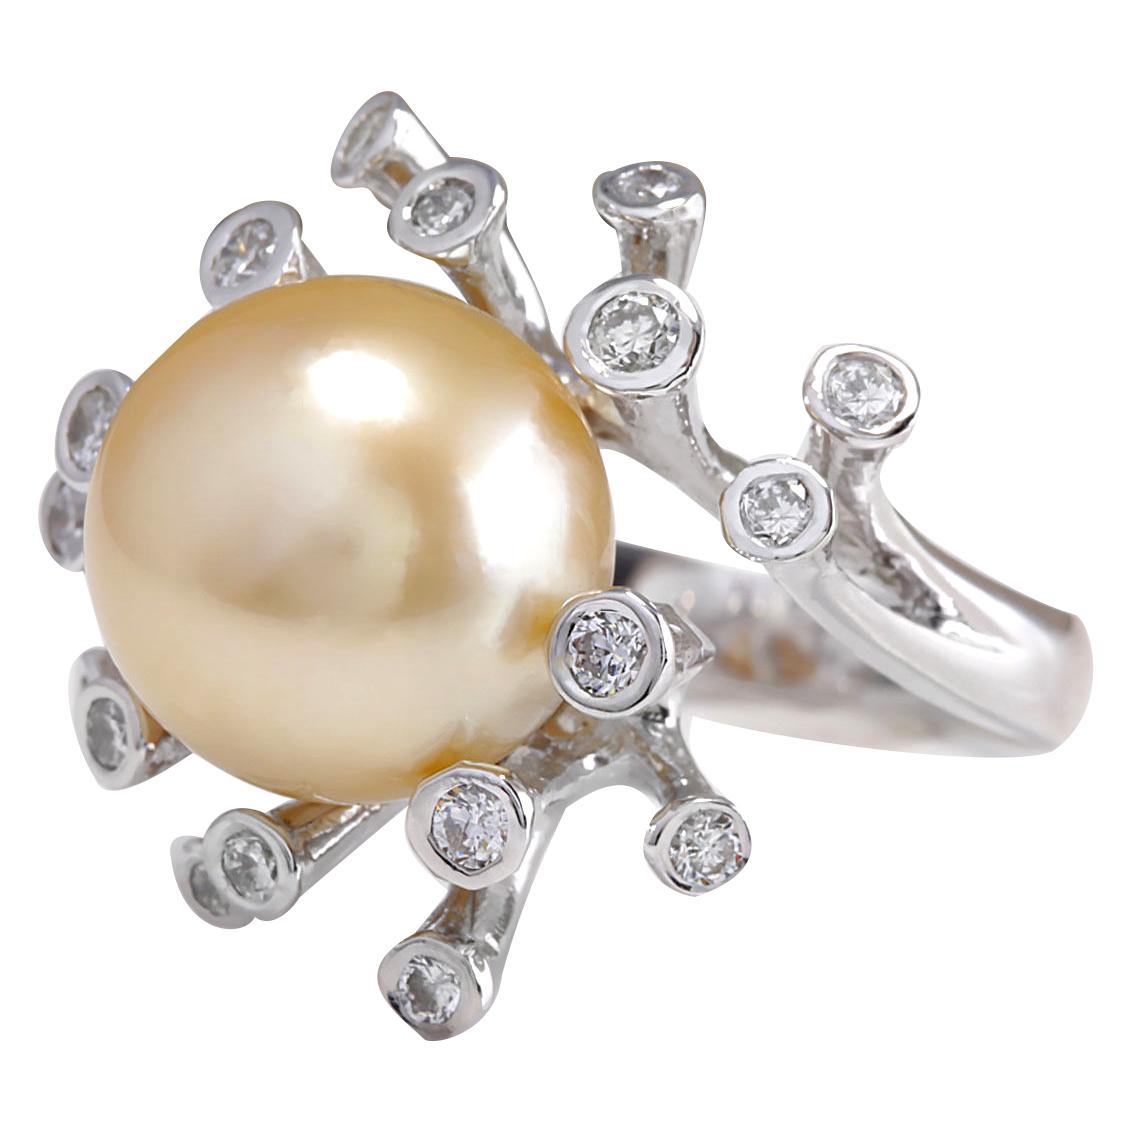 Stamped: 14K White Gold
Total Ring Weight: 9.2 Grams
Total Natural South Sea Pearl Weight is N/A (Measures: 13.00 mm)
Color: Gold
Total Natural Diamond Weight is 0.80 Carat
Color: F-G, Clarity: VS2-SI1
Face Measures: 24.95x23.00 mm
Sku: [703176W]